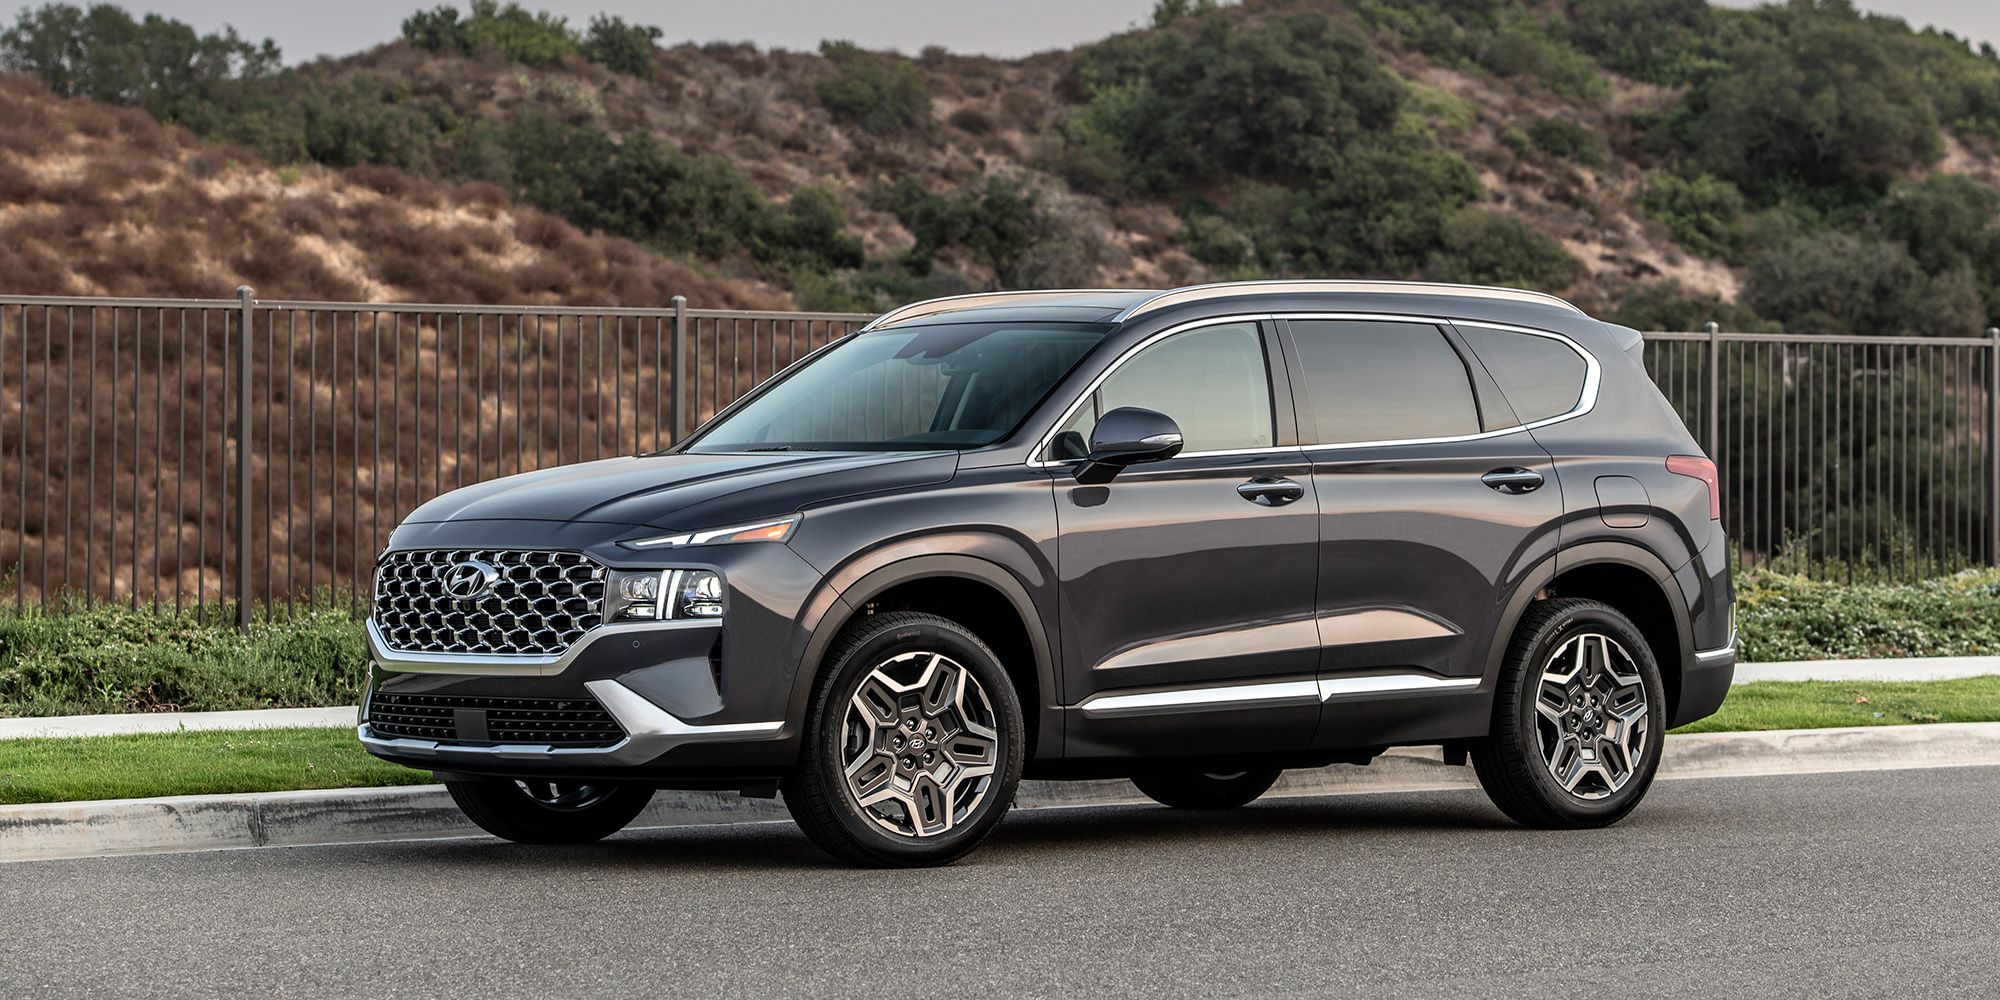 These Are The 10 Best Midsize SUVs To Buy Used (2022)